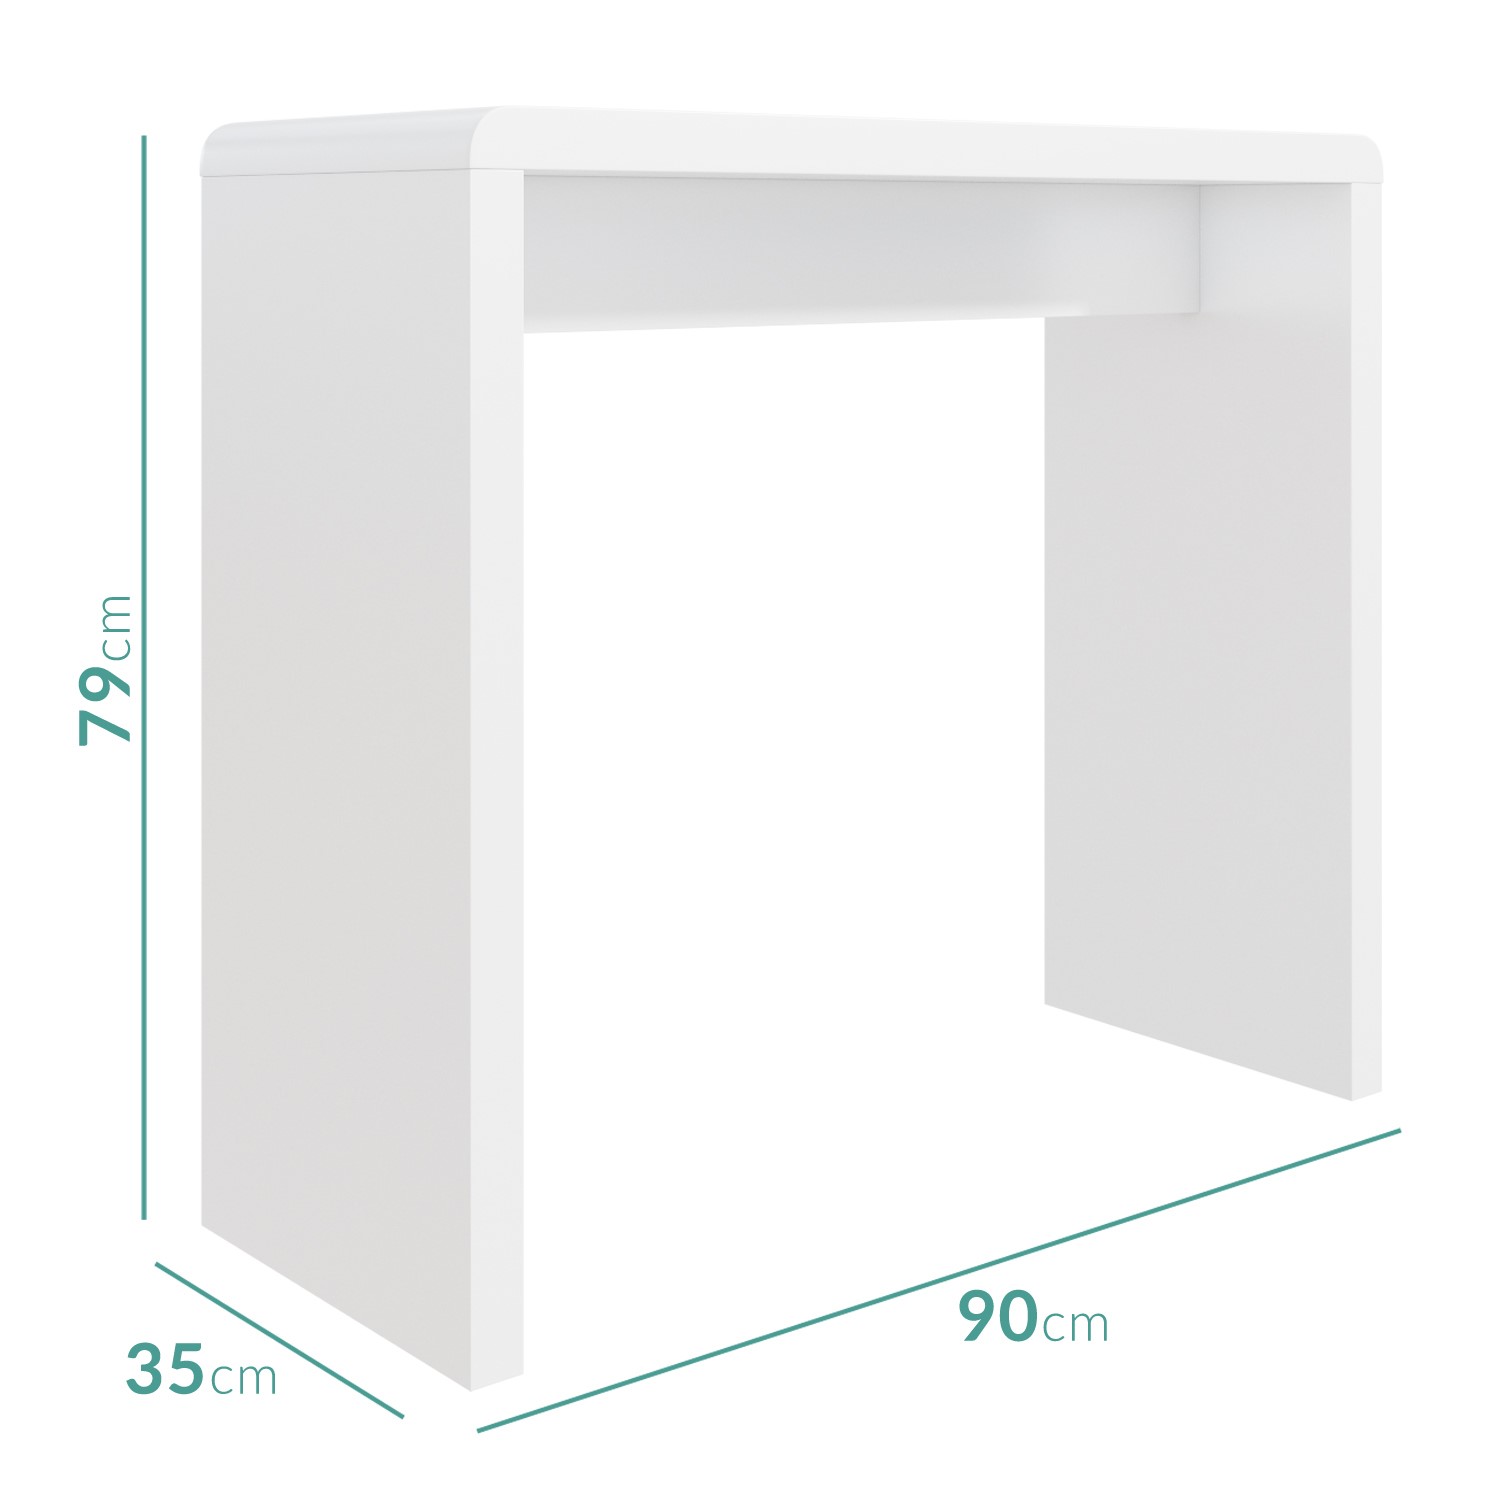 Slim Gloss Console Table In White, Small White Console Table With Drawers